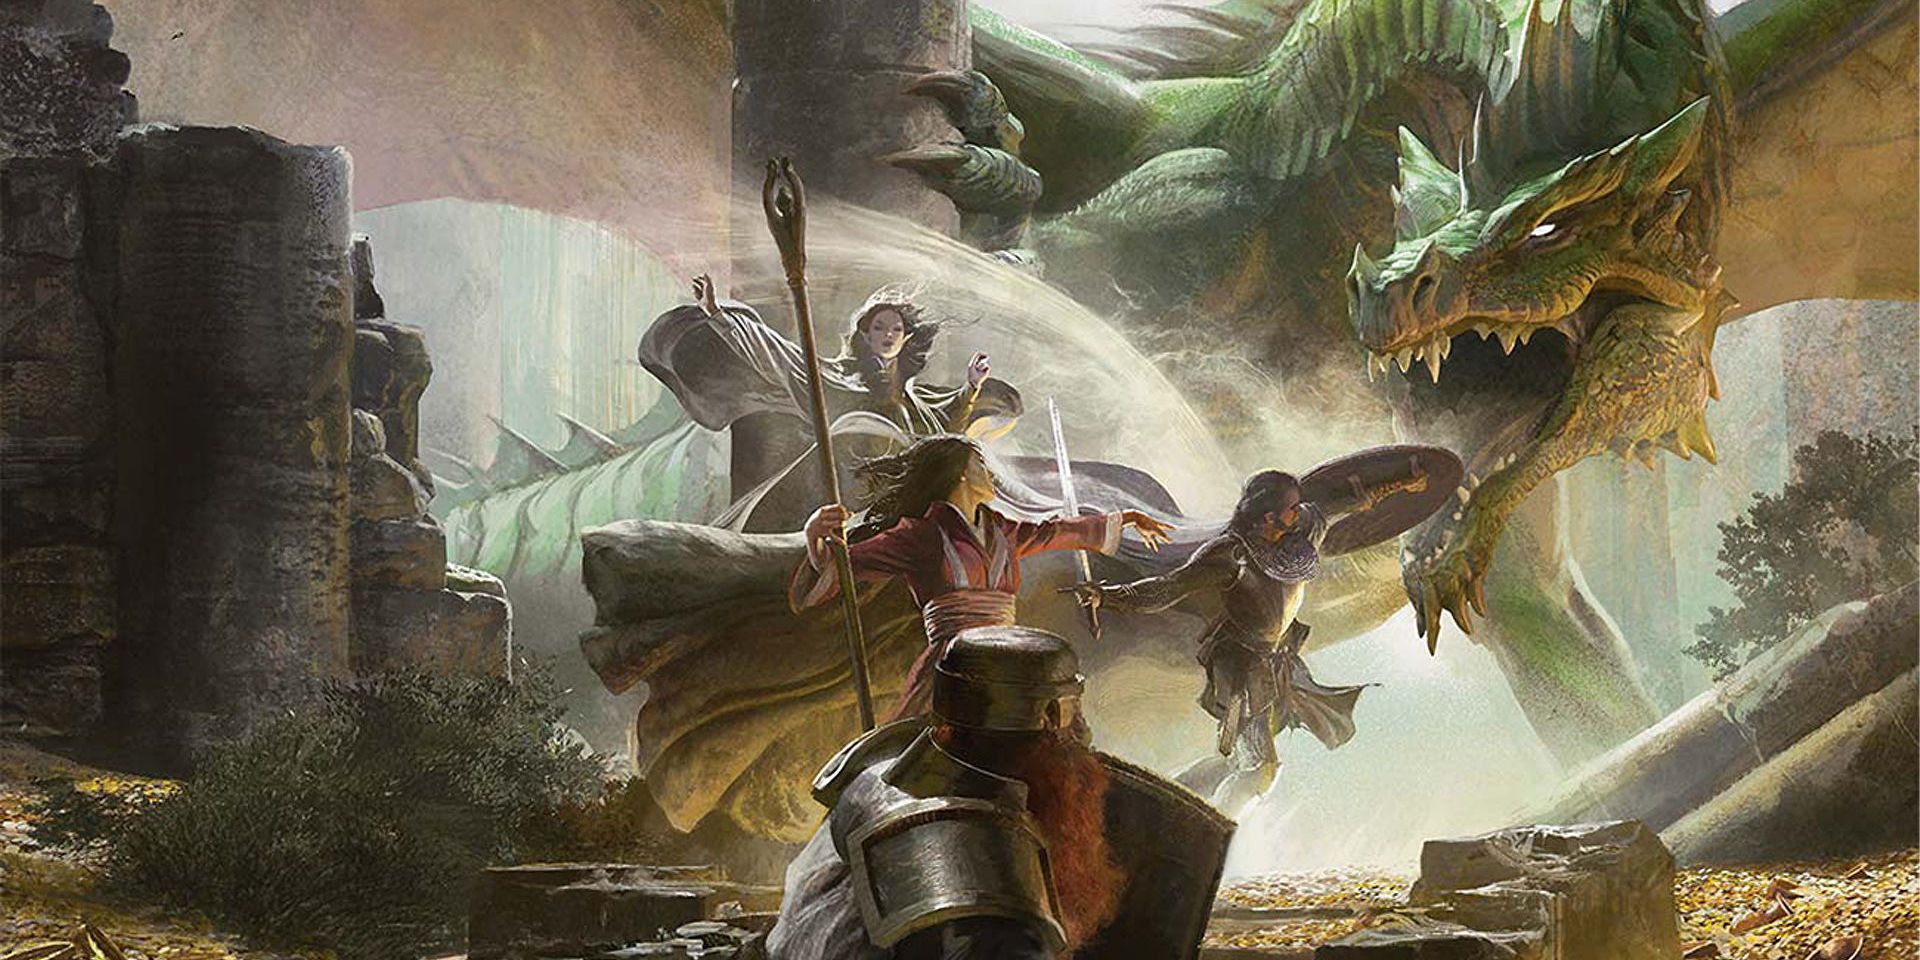 Critical Roles House Rules On Resurrection Makes Death In D&D Better